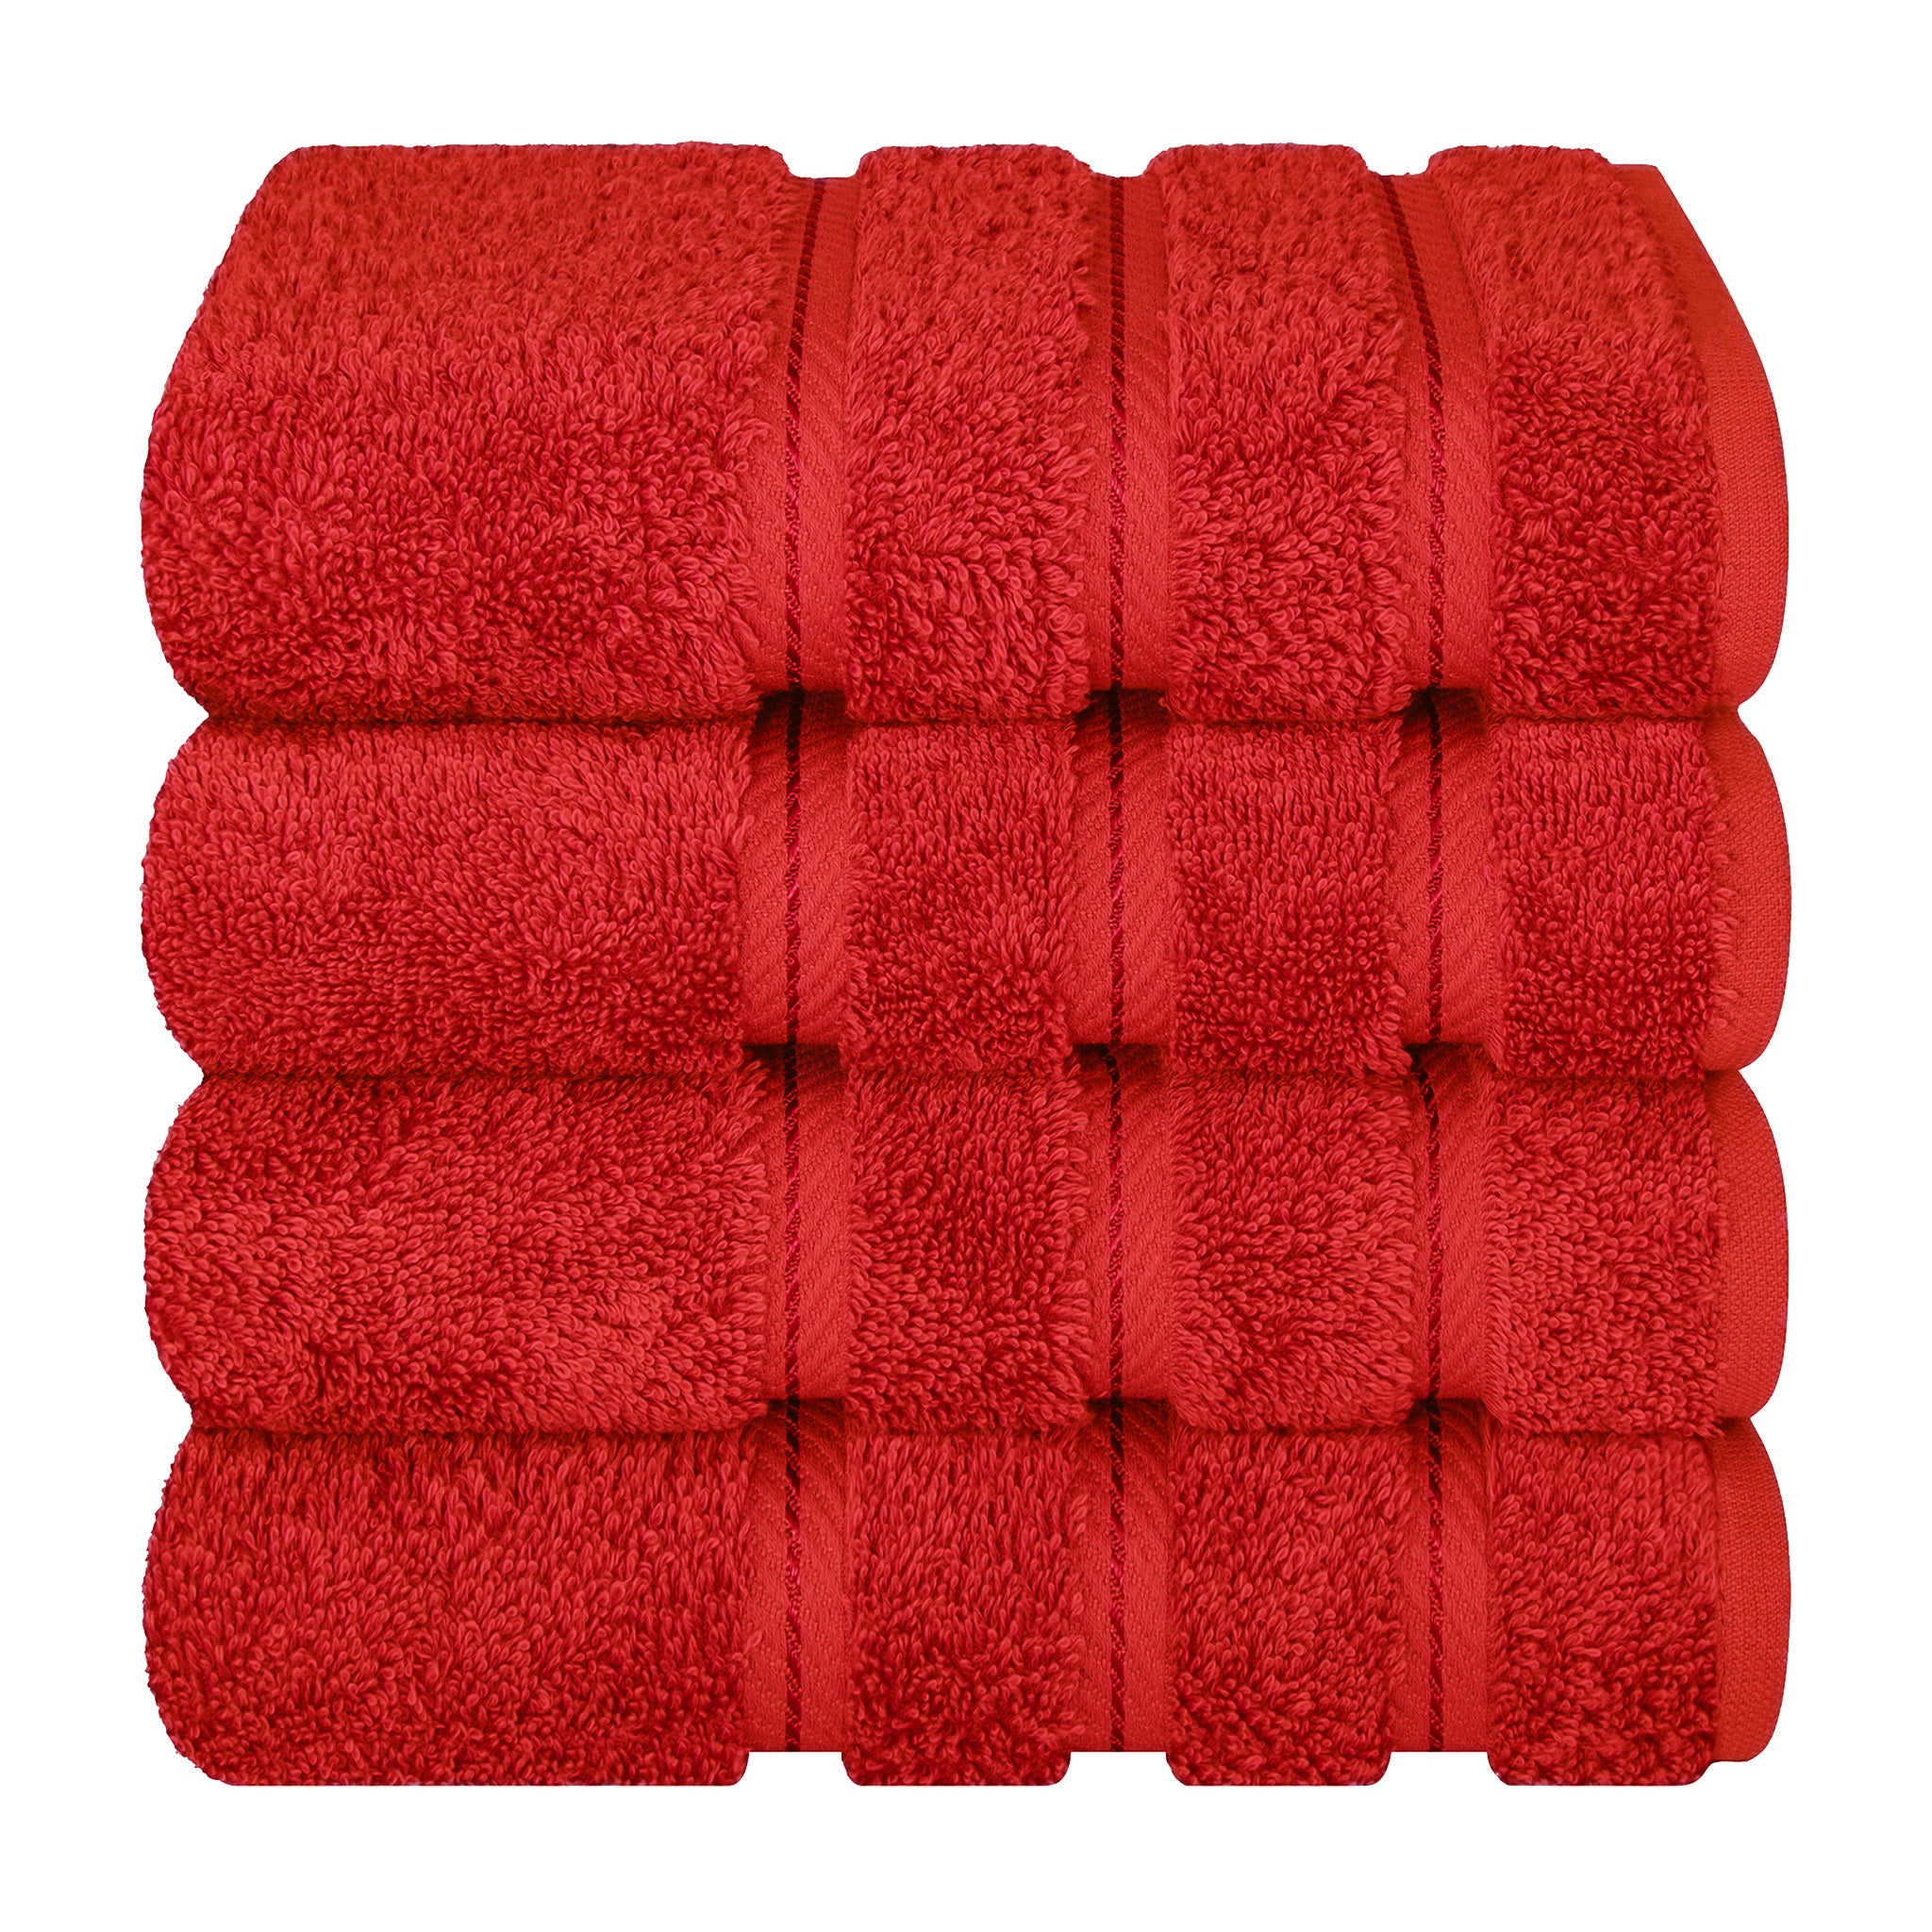 American Soft Linen 100% Turkish Cotton 4 Pack Hand Towel Set red-7